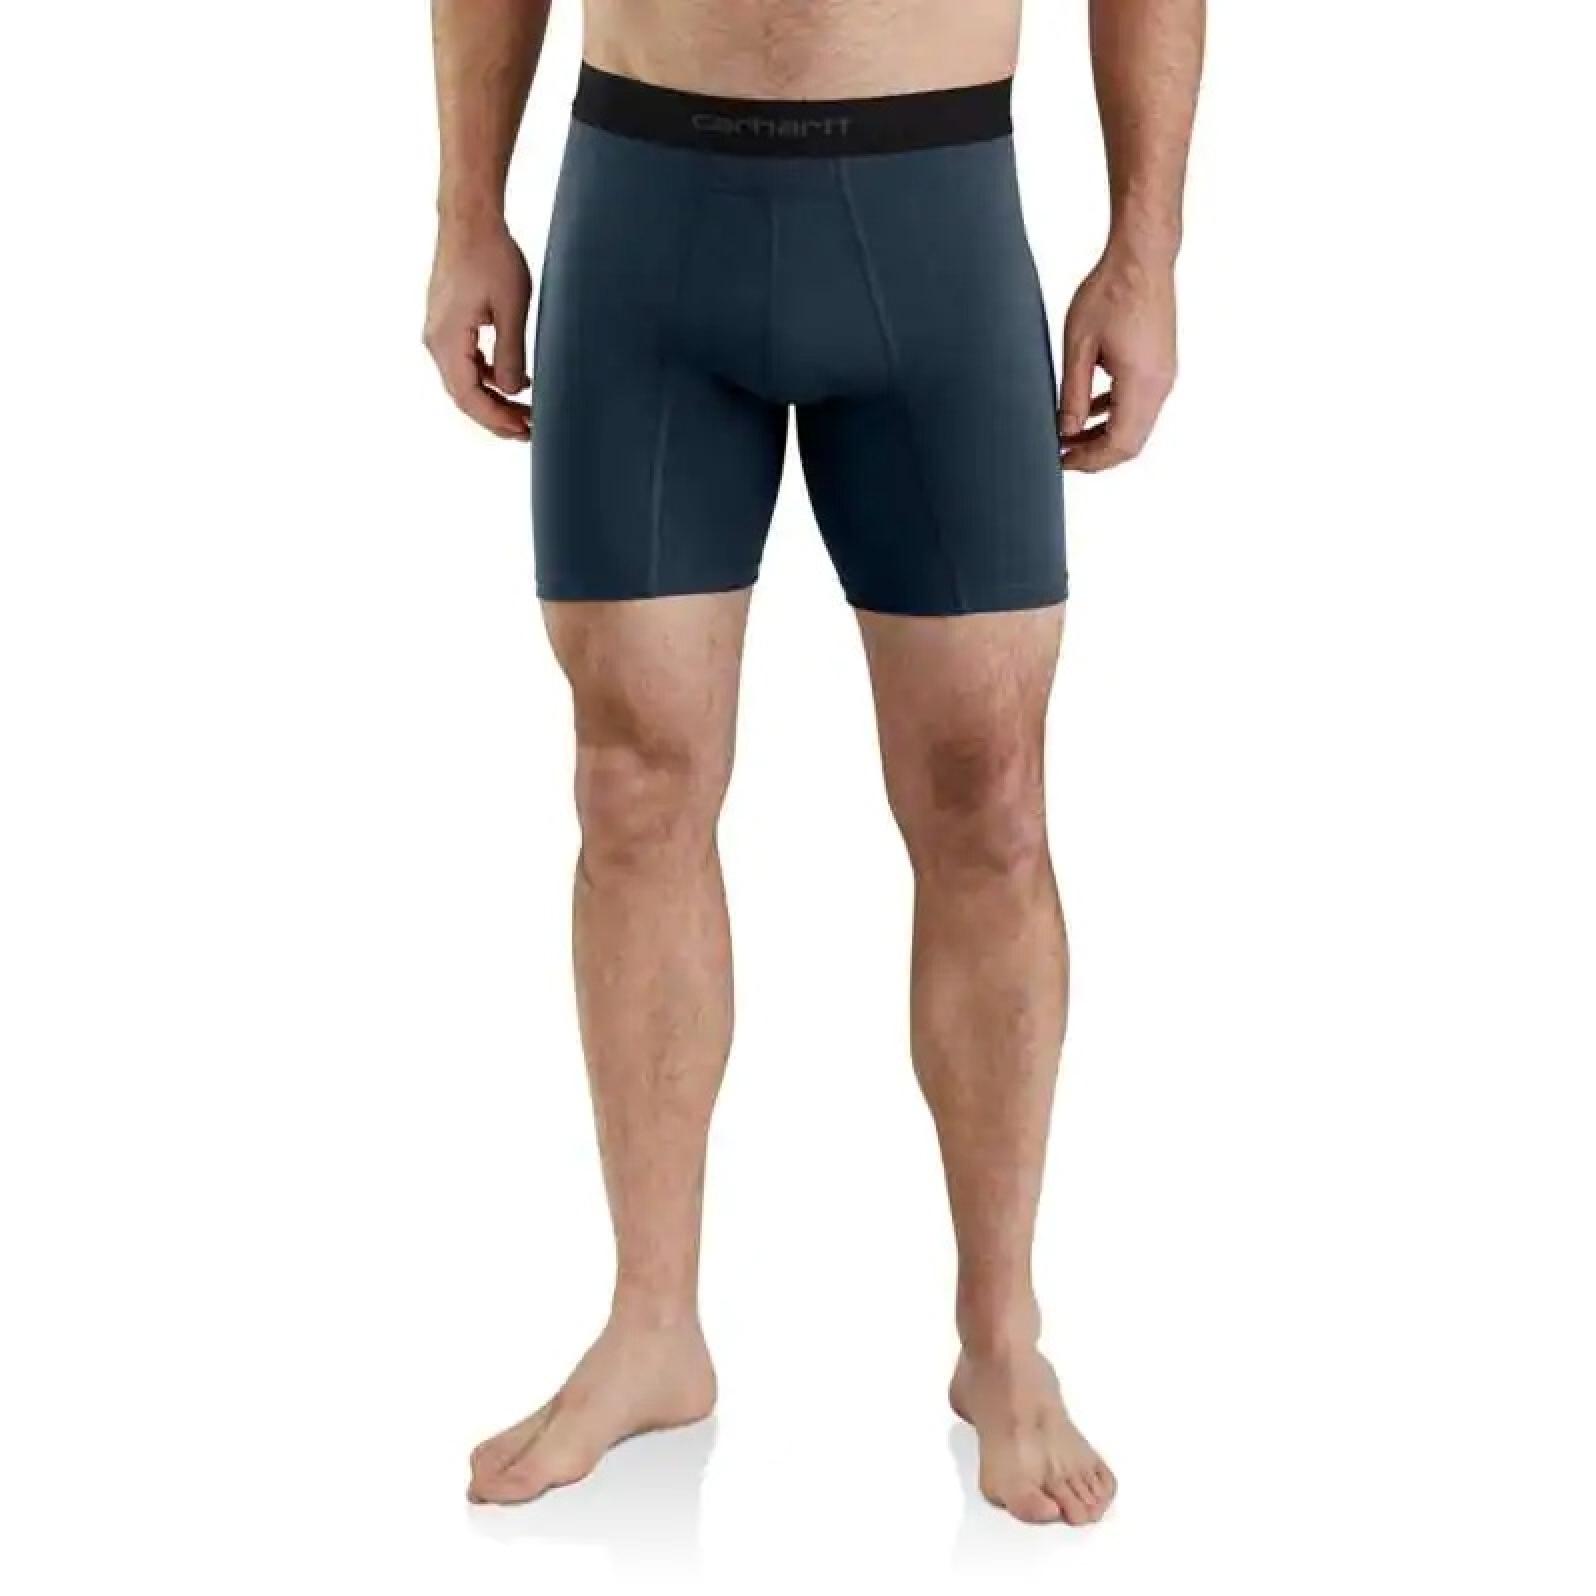 Carhartt 8" Basic Cotton-Poly Boxer Brief 2 Pack